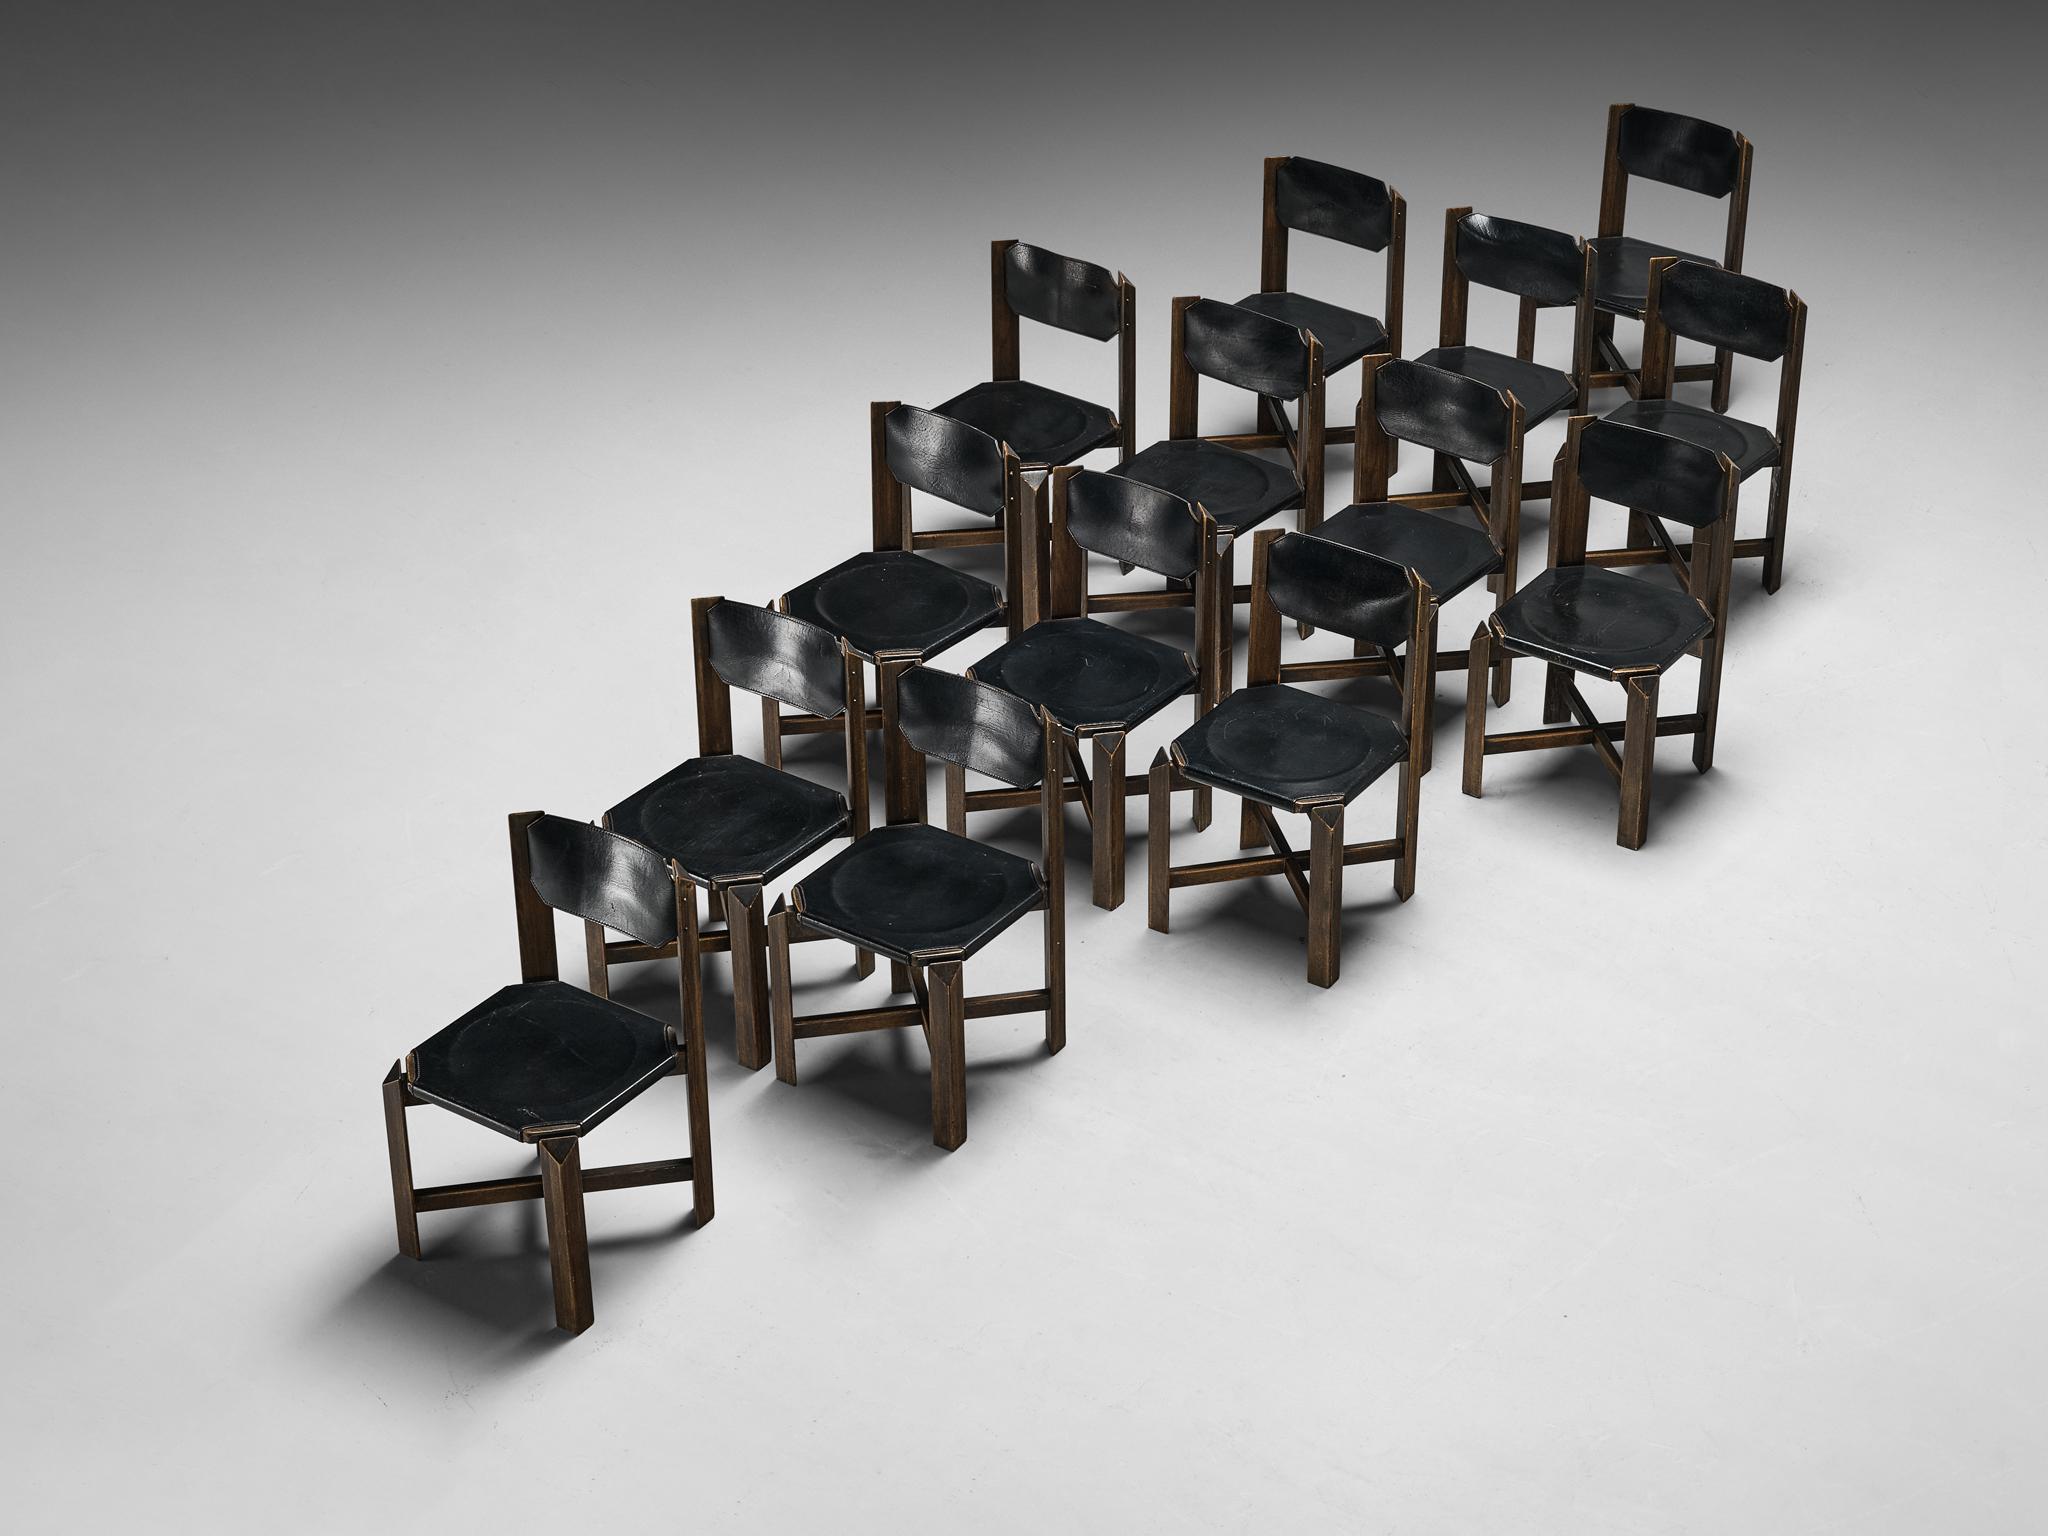 Set of fourteen dining chairs, leather, beech, Europe, 1970s

These dining chairs embrace a sturdy construction, featuring durable black leather upholstery complemented by a robust wooden framework. The architectural design showcases precise